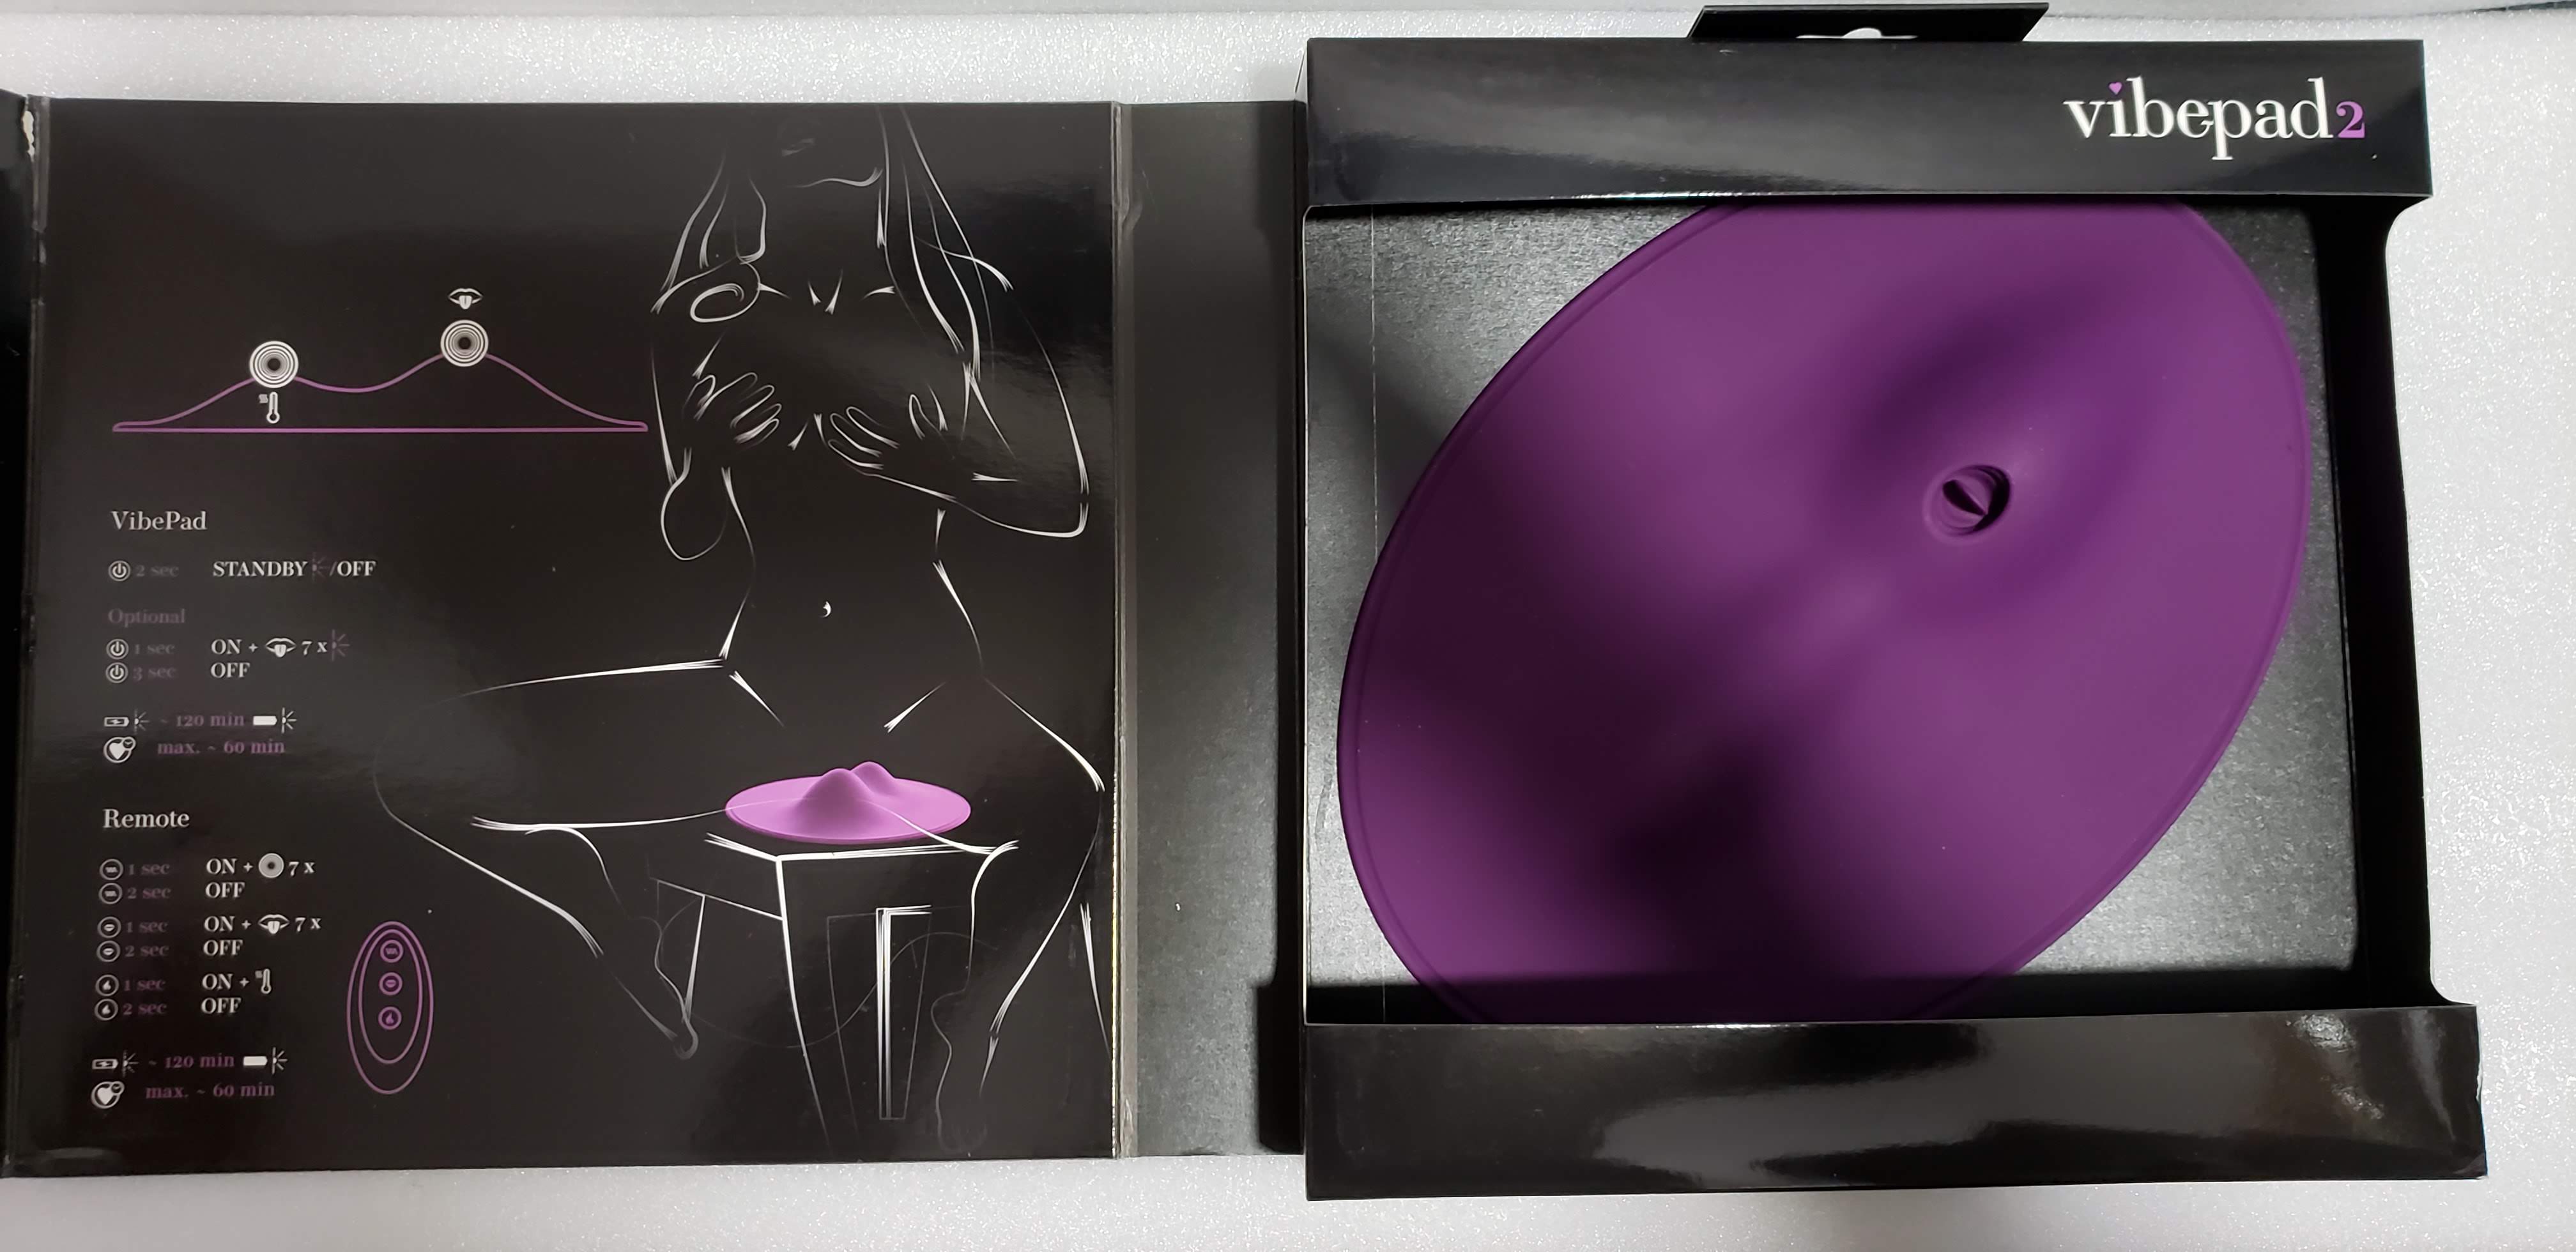 Image of Orion VibePad 2 in box with front flap open. Inside image shows a lineart drawing of a nude woman using the device and product details.